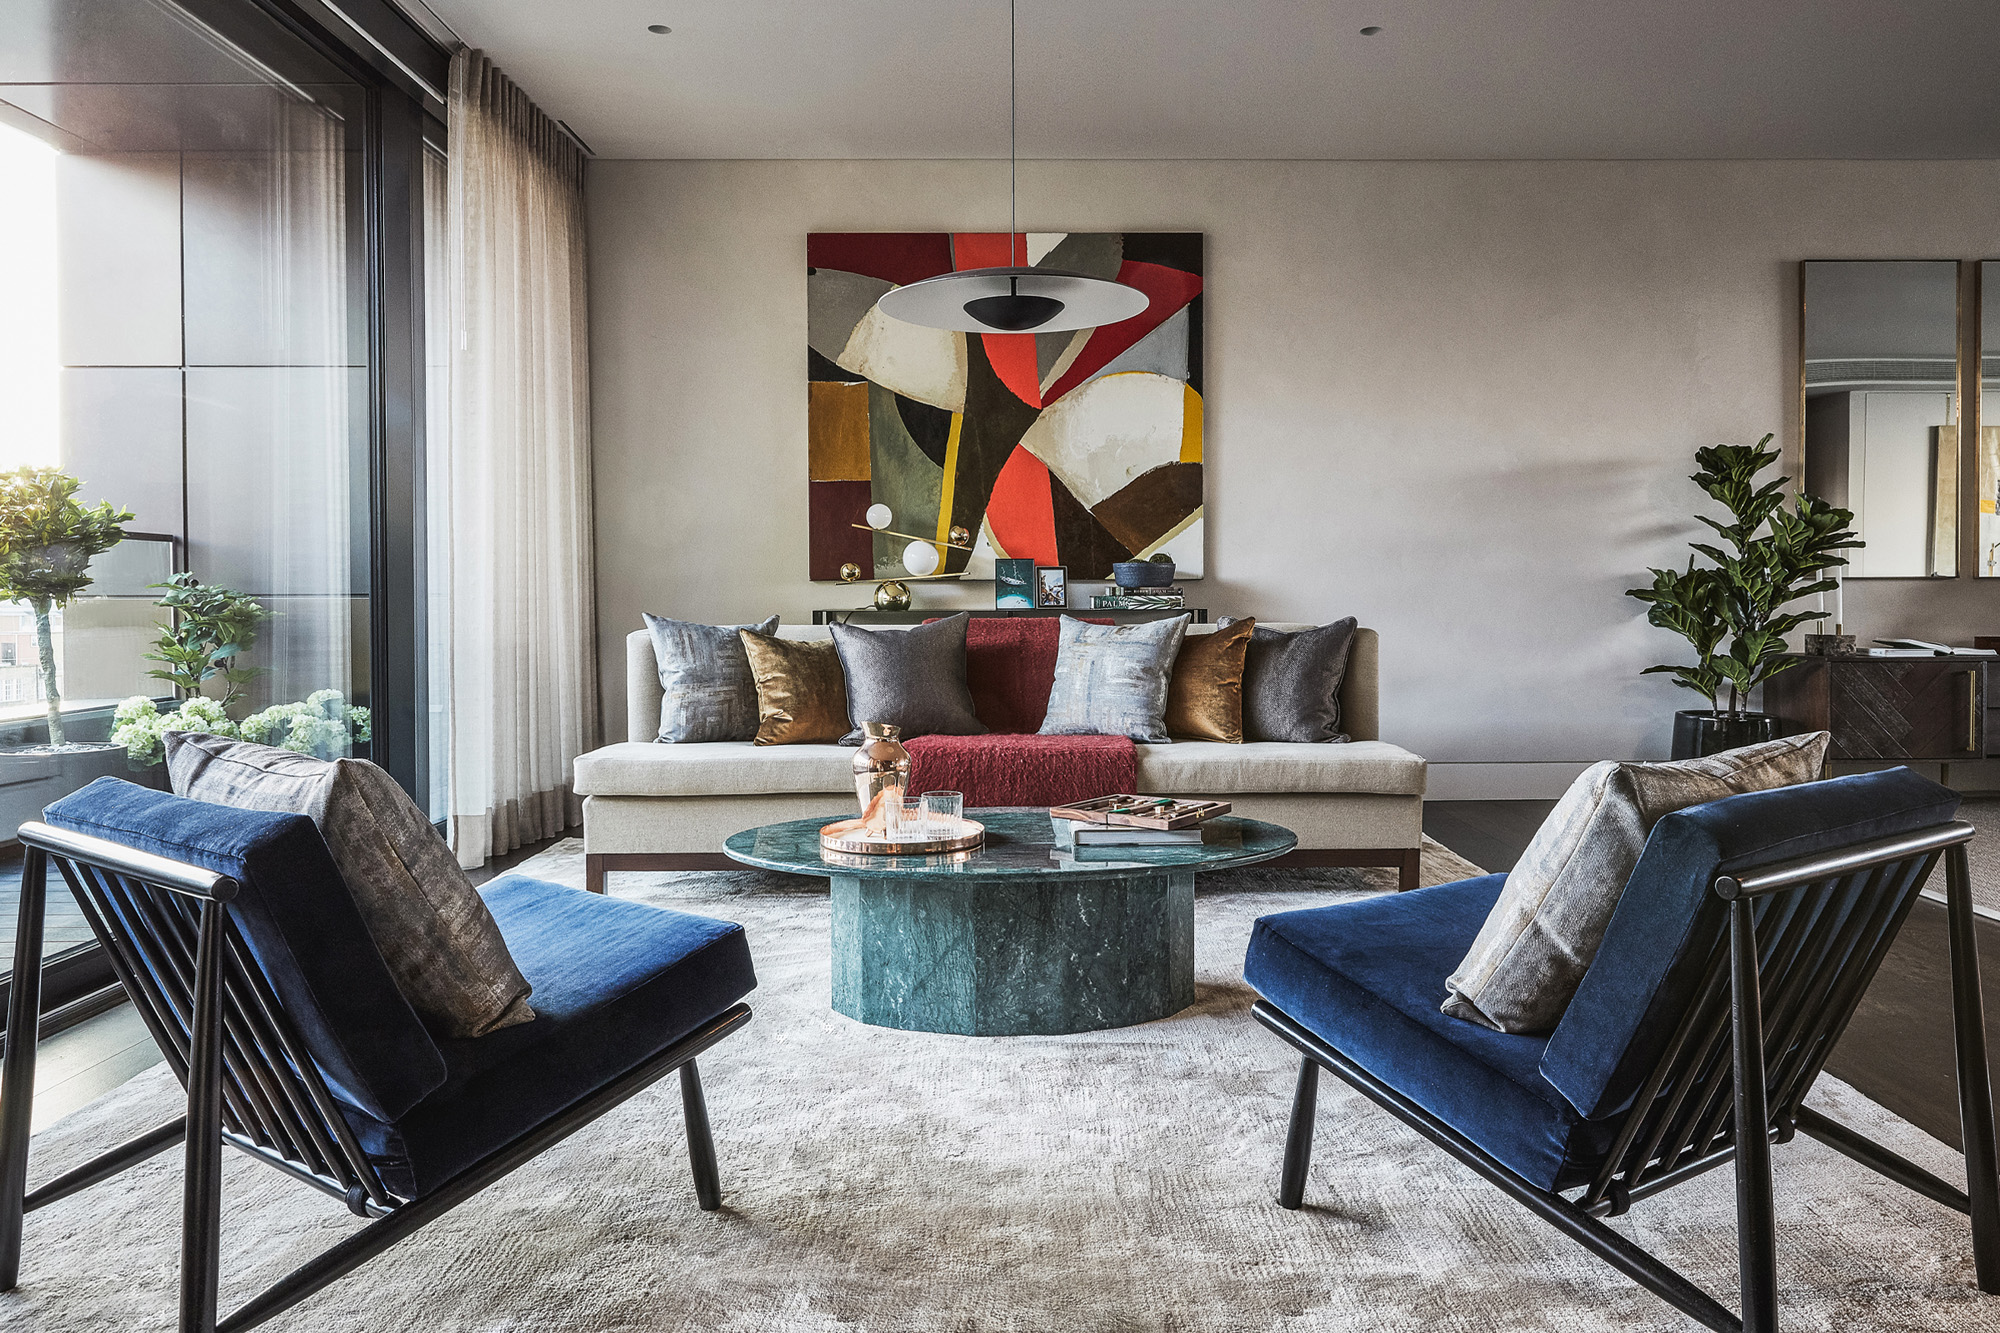 Luxury architecture and interior design in London: Living room at Rathbone Square